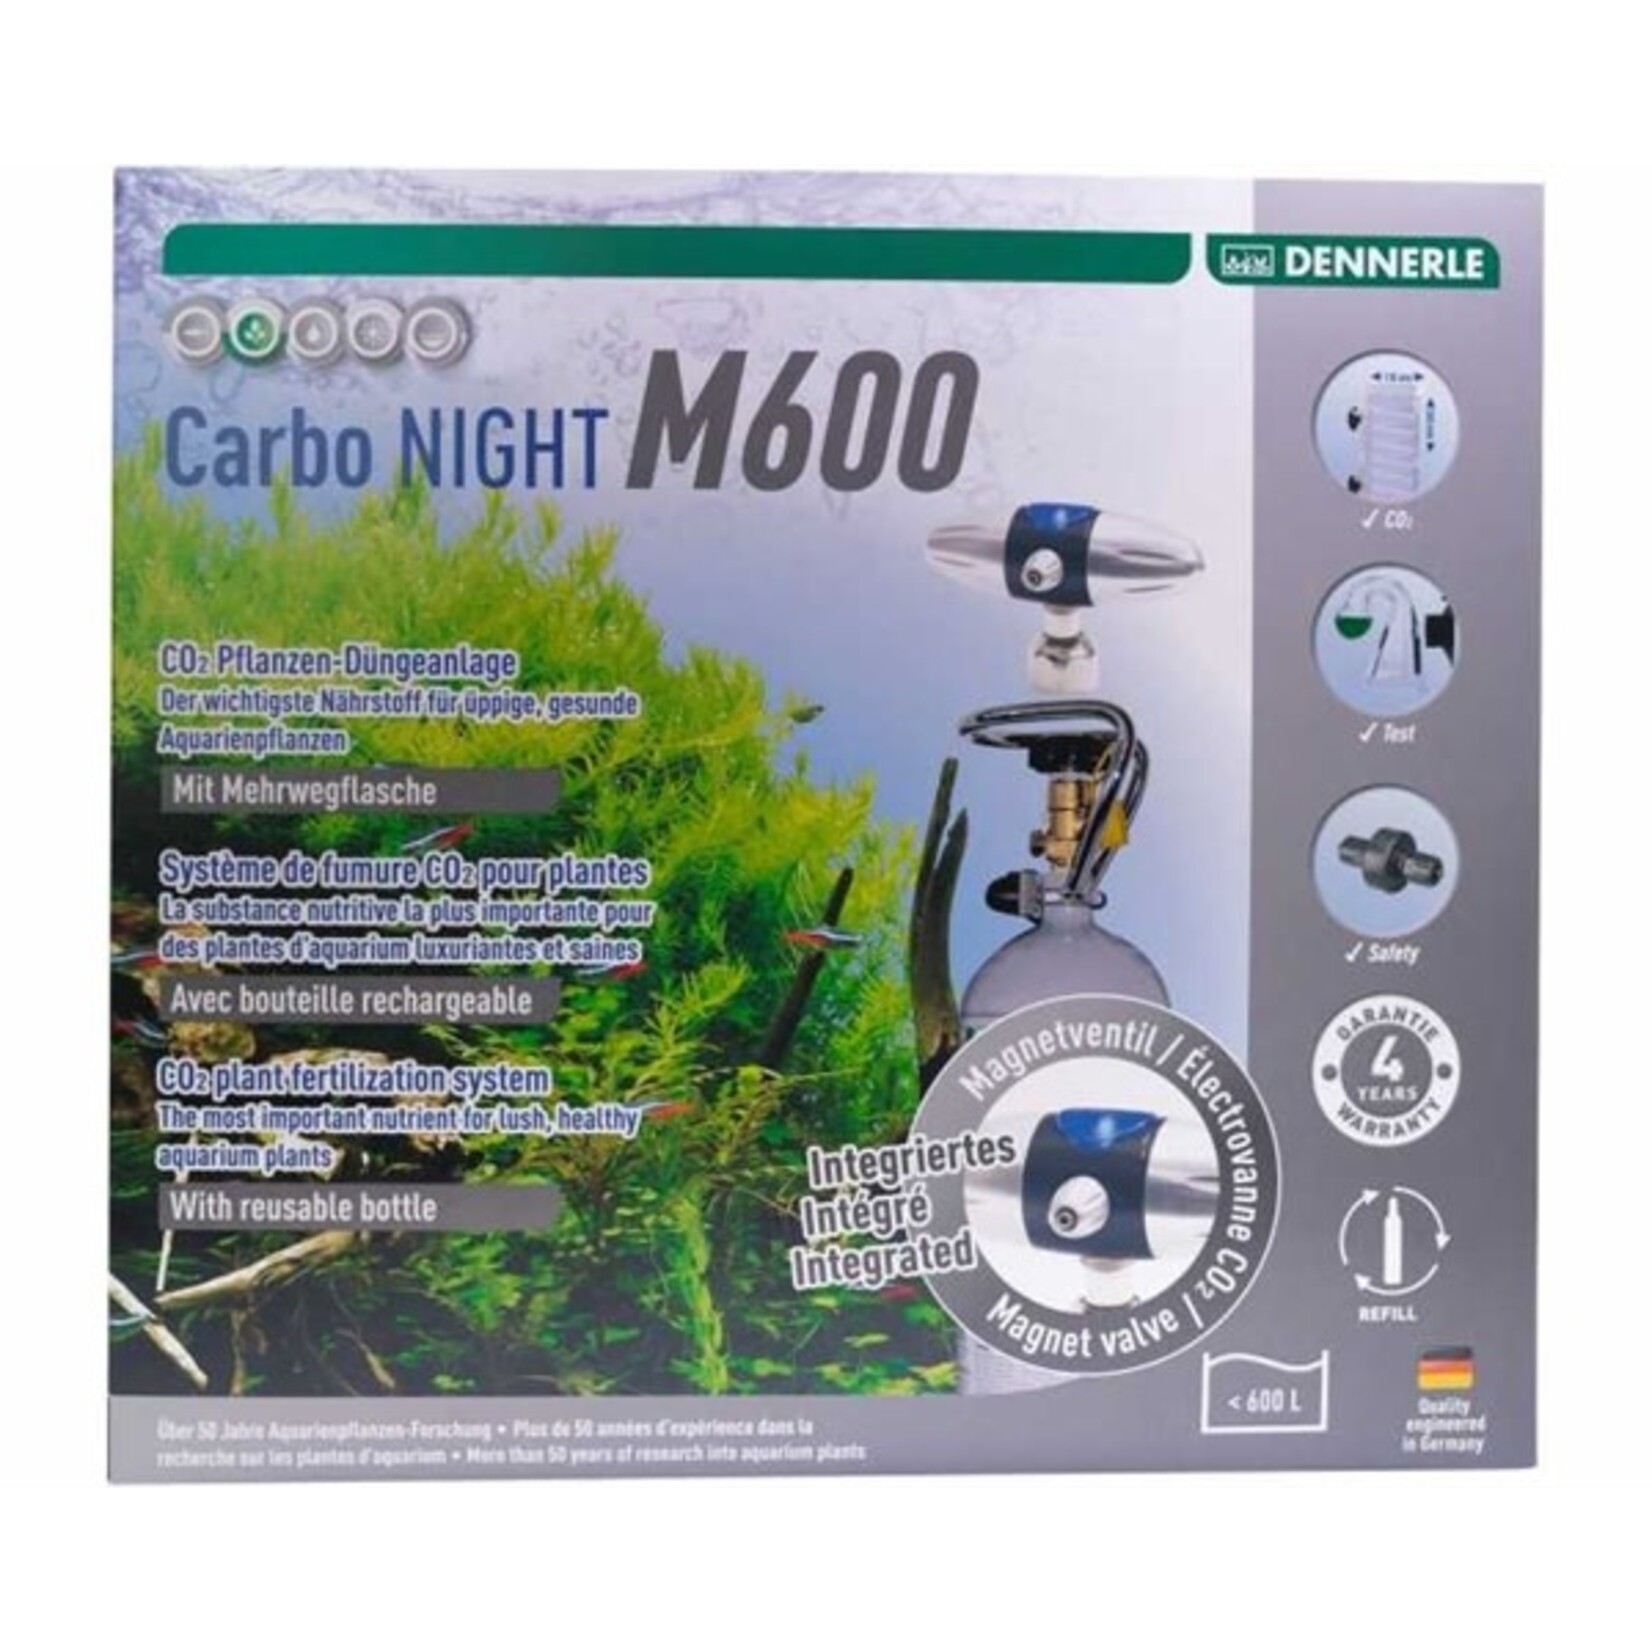 Dennerle DENNERLE CO2 CARBO NIGHT M600